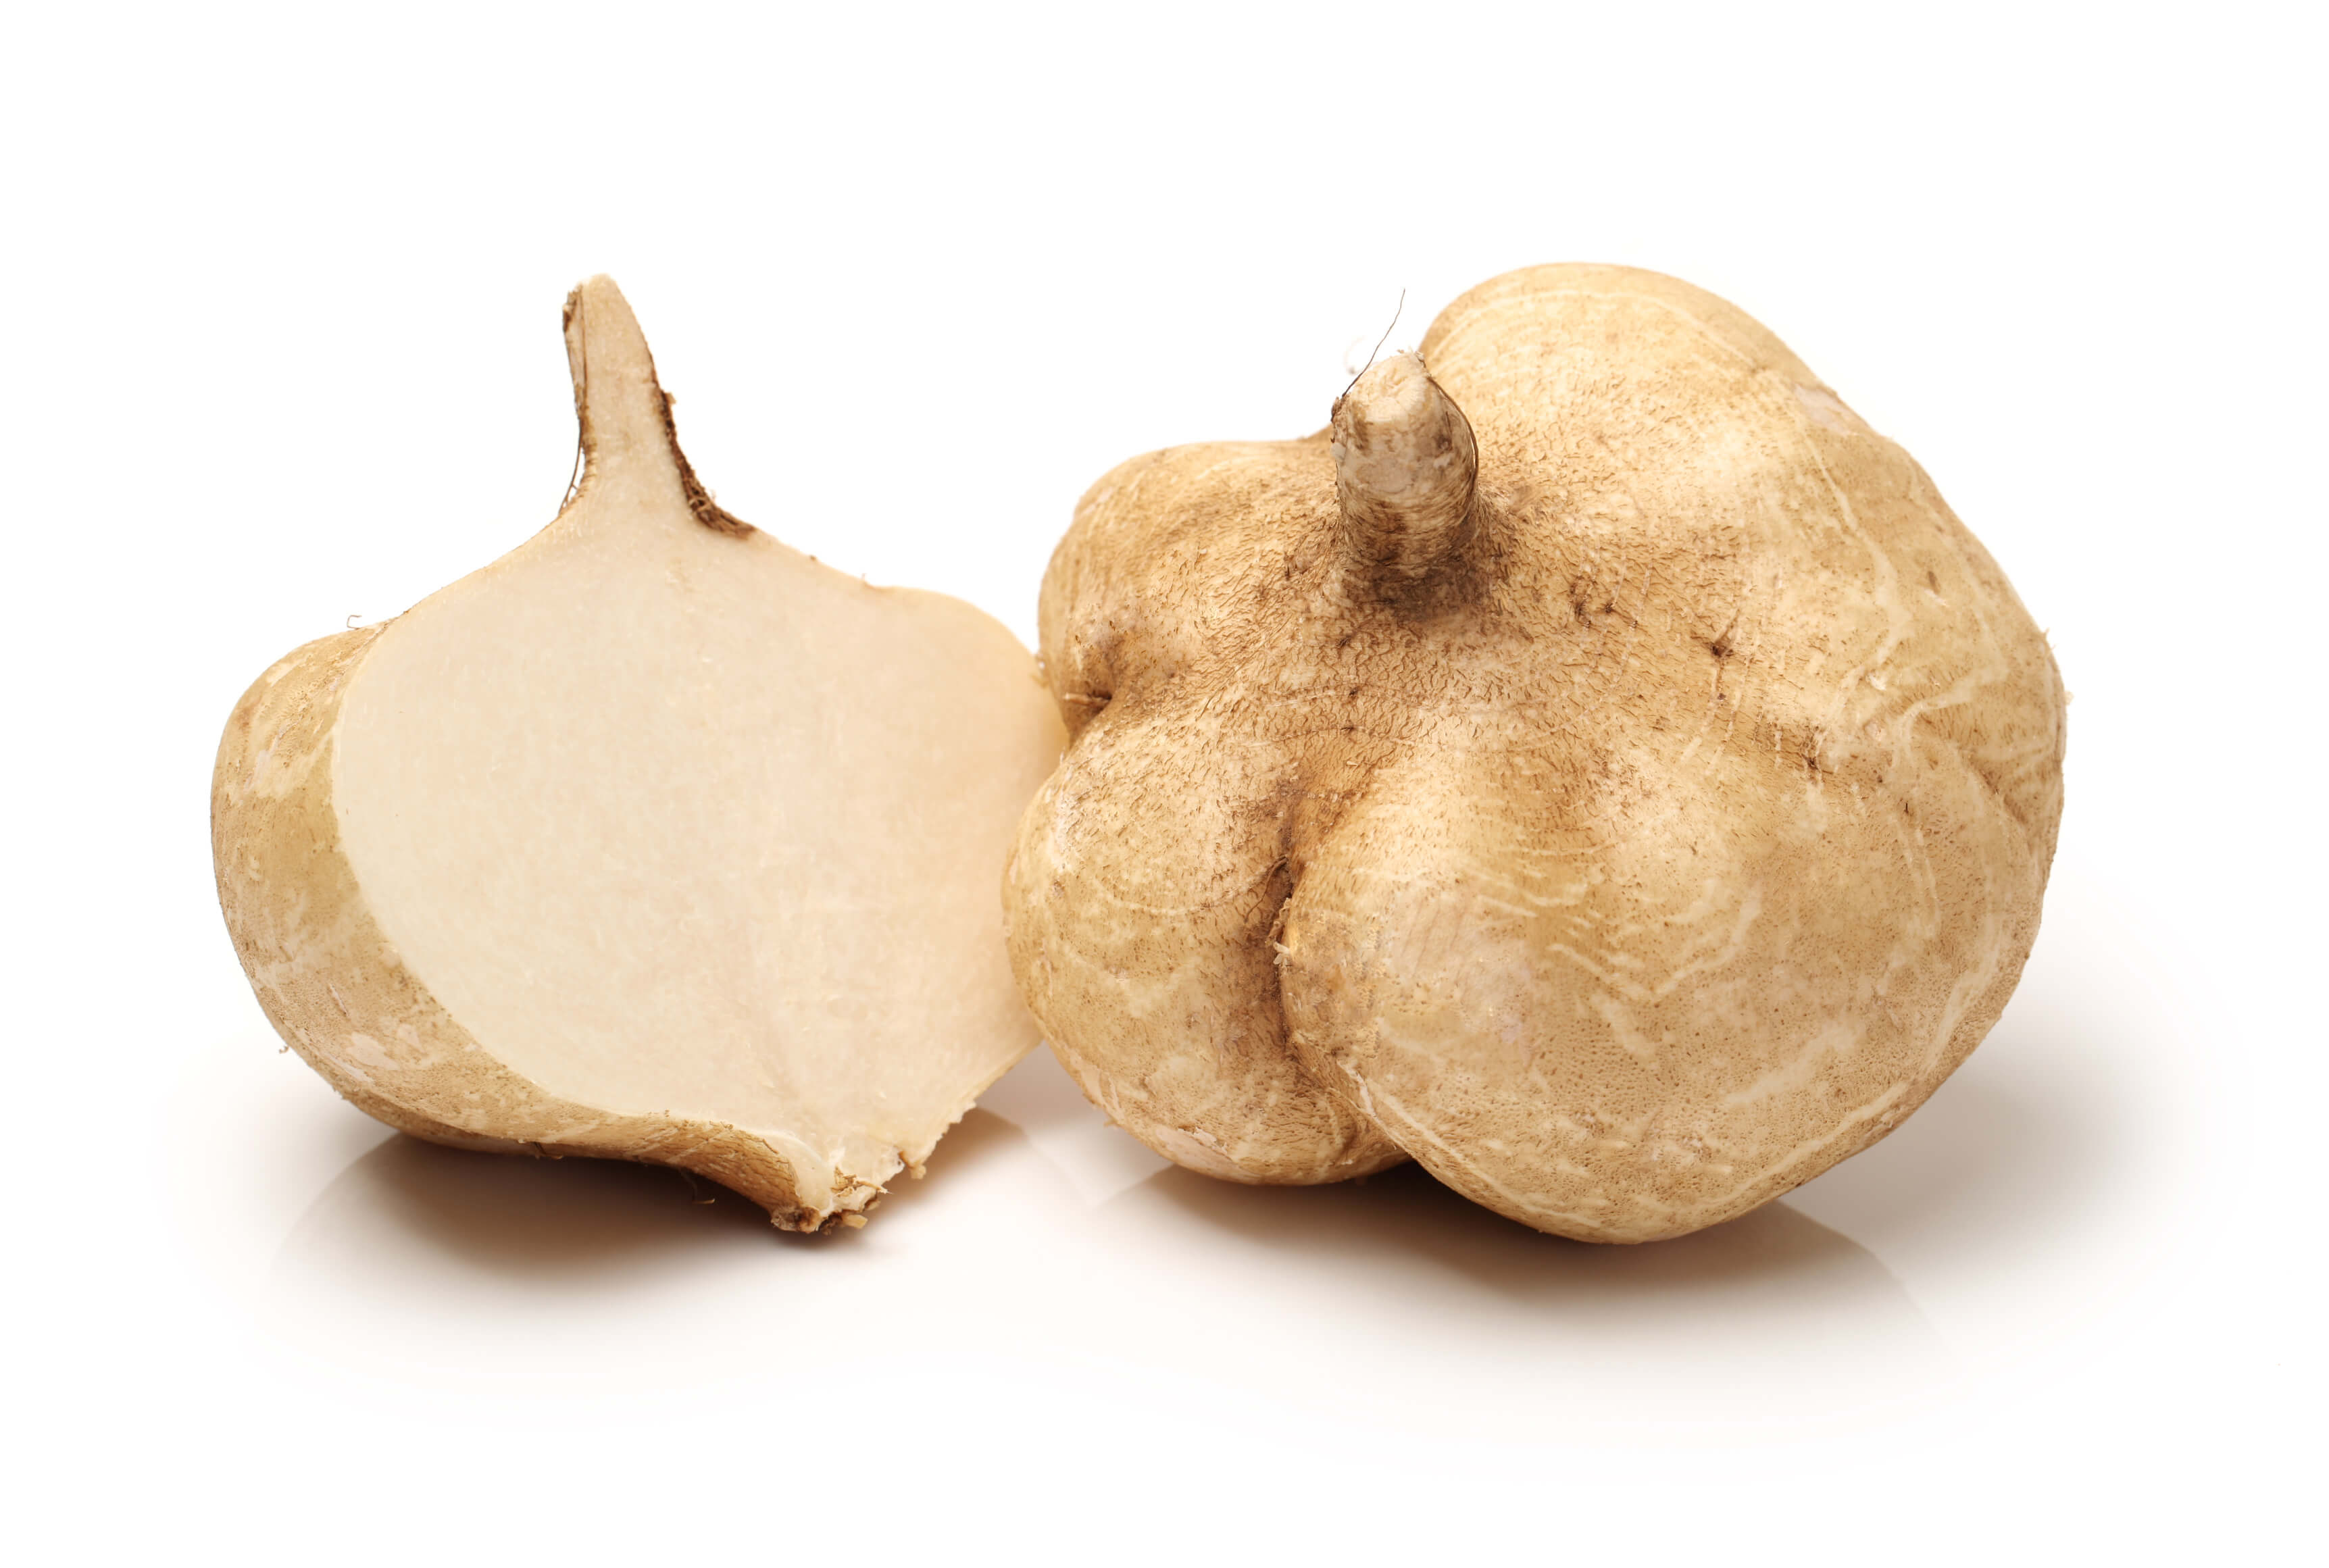 12 Fruits and Vegetables to Shake Up Your Meals: Jicama